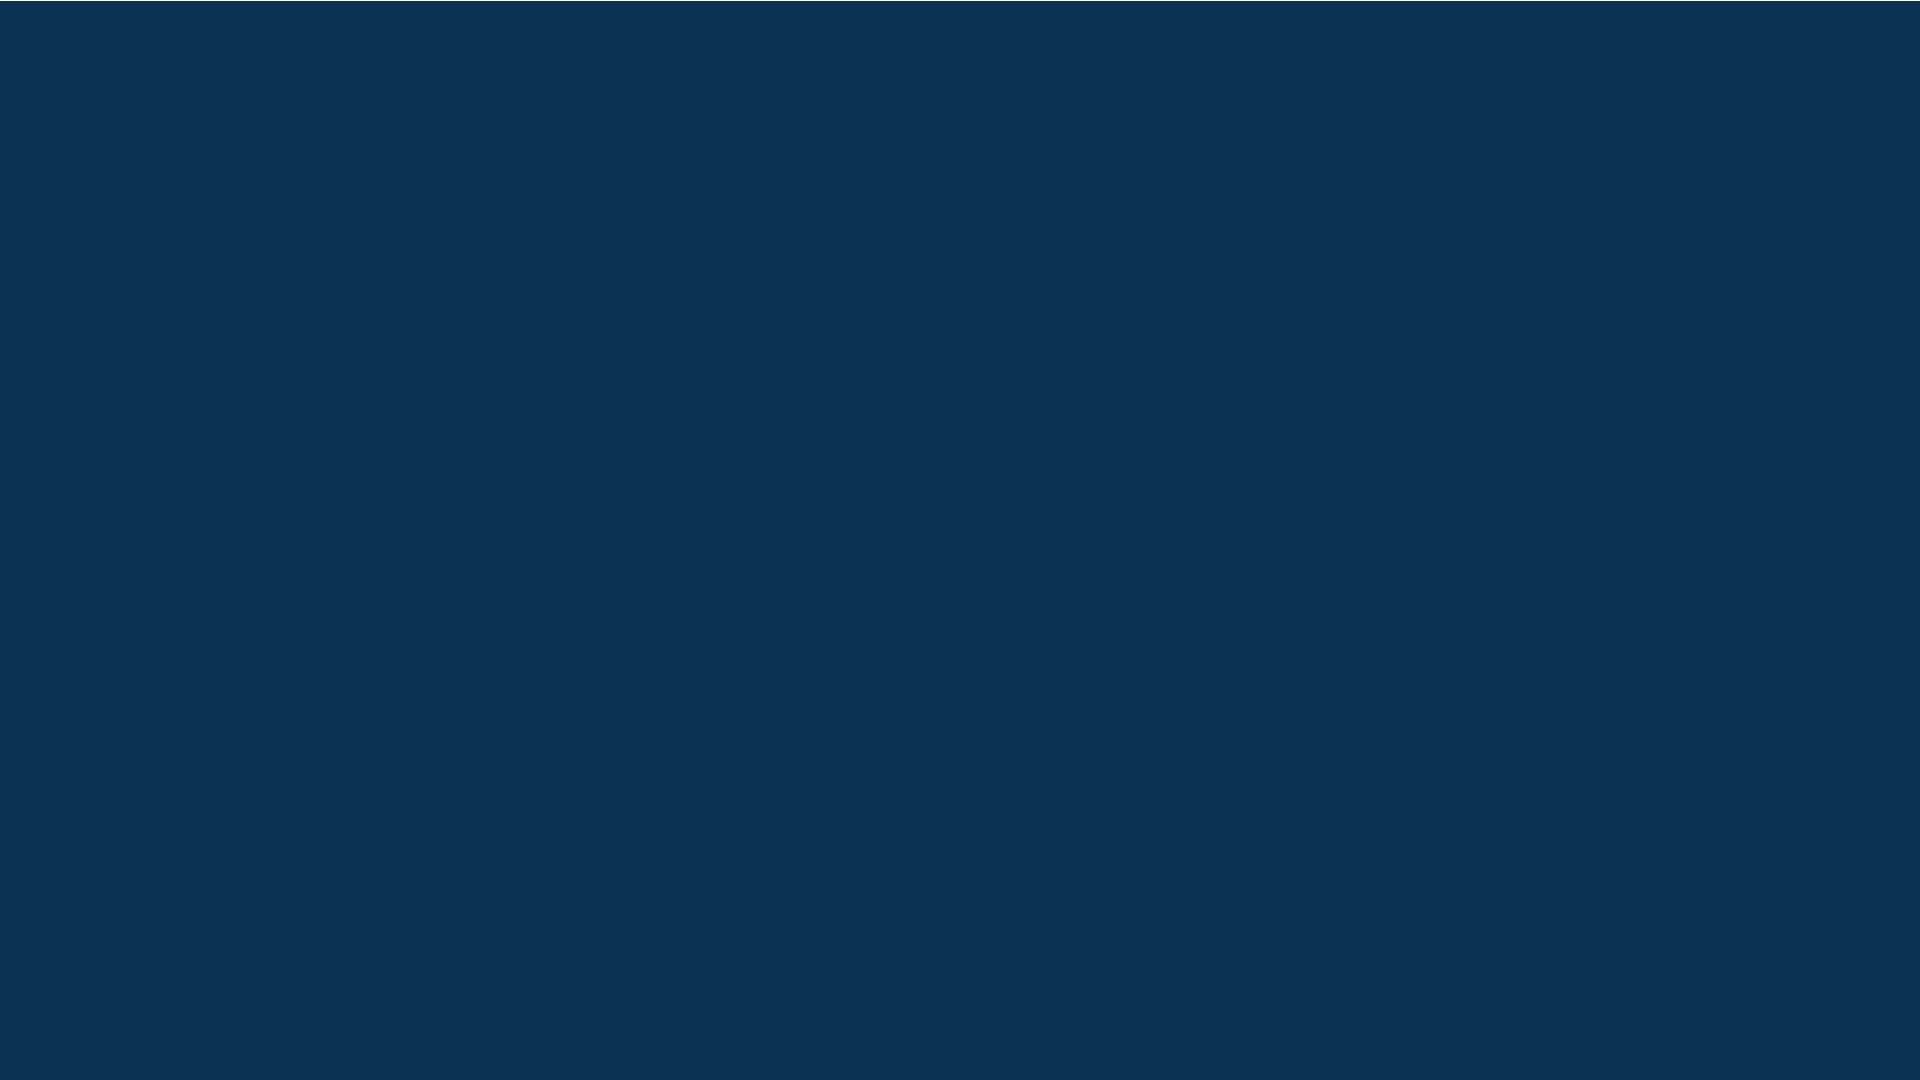 Prussian Blue Solid Color Background: 1000+ Free Download Vector, Image,  PNG, PSD Files